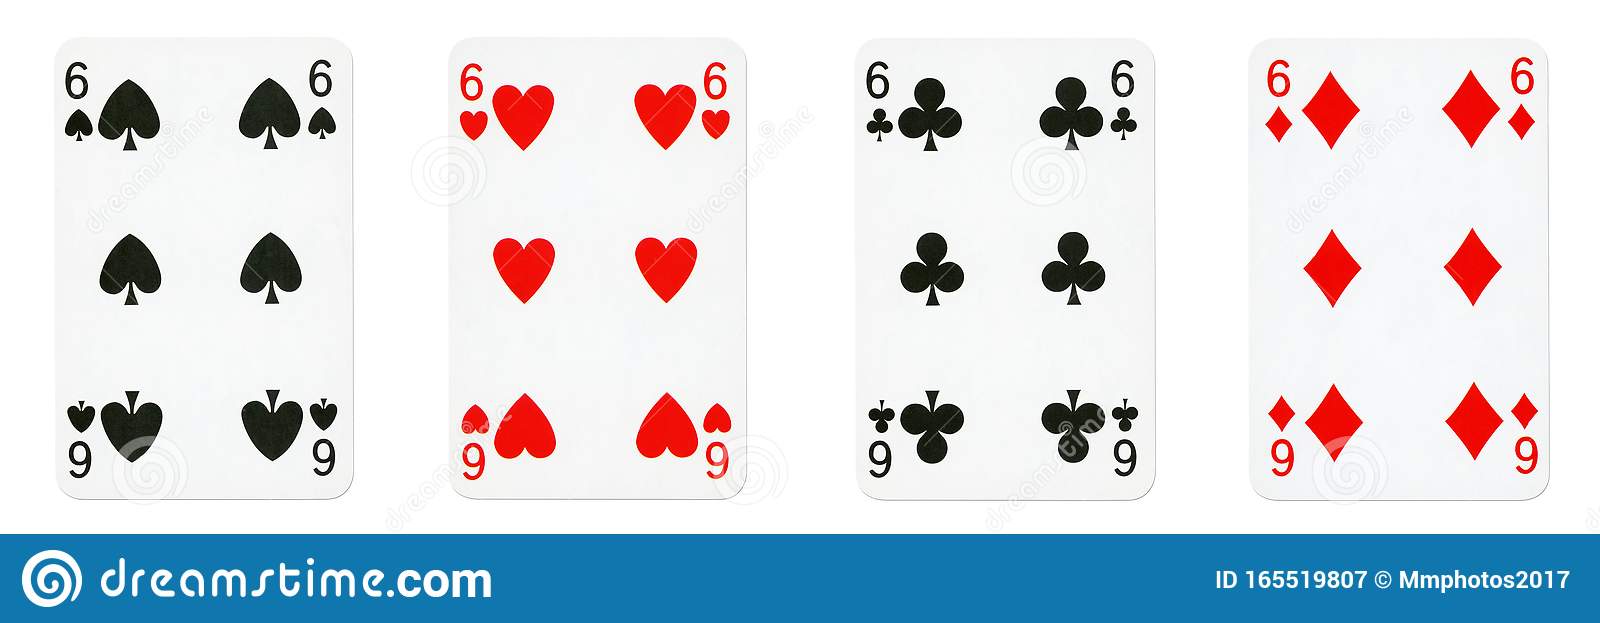 Detail Playing Cards Images High Resolution Nomer 20